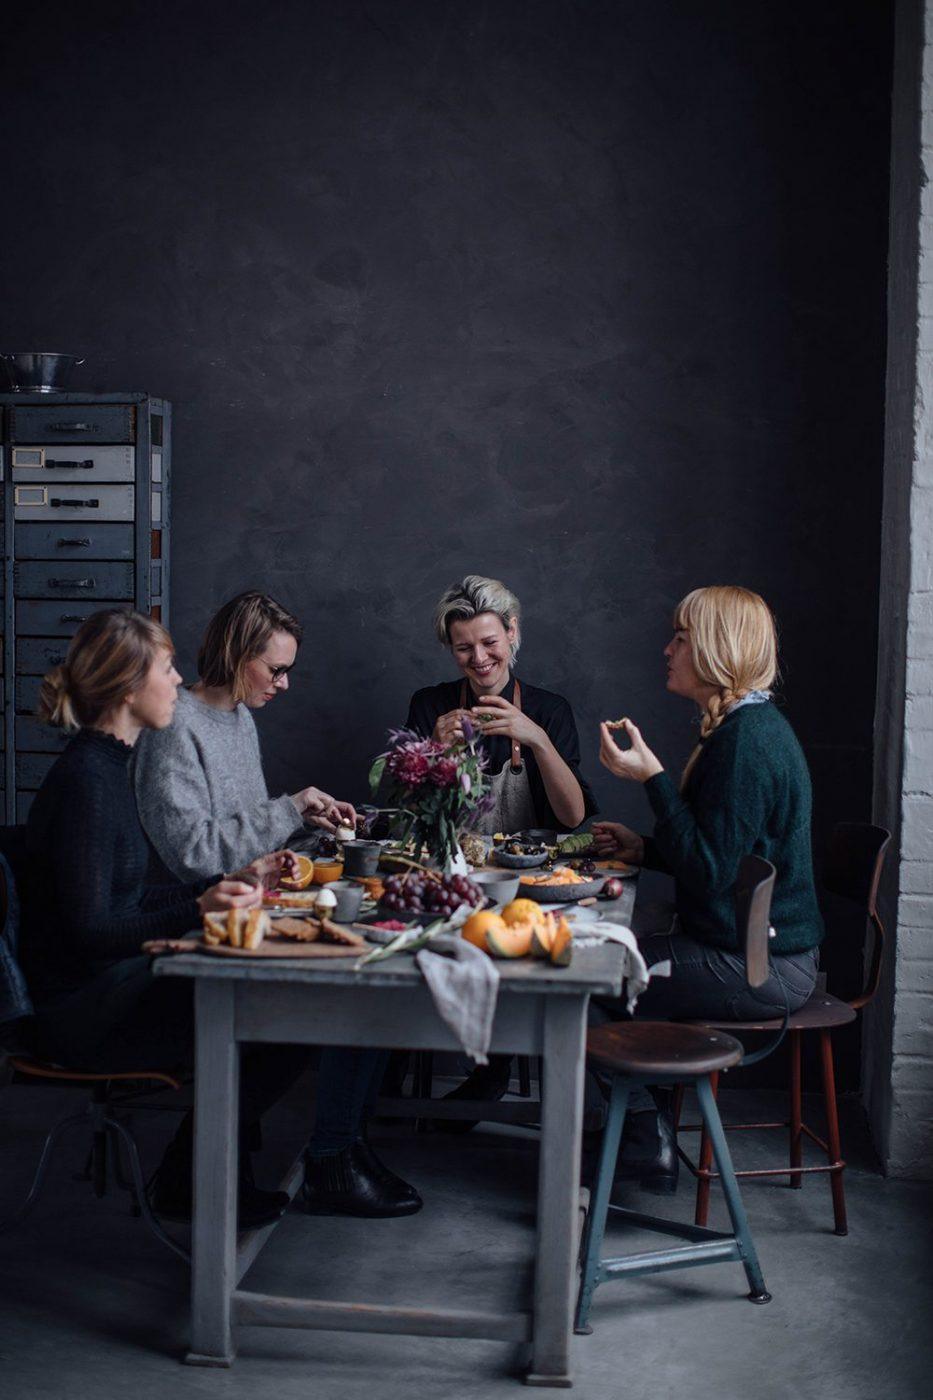 Image for Breakfast Gathering in our Berlin Studio with Friends